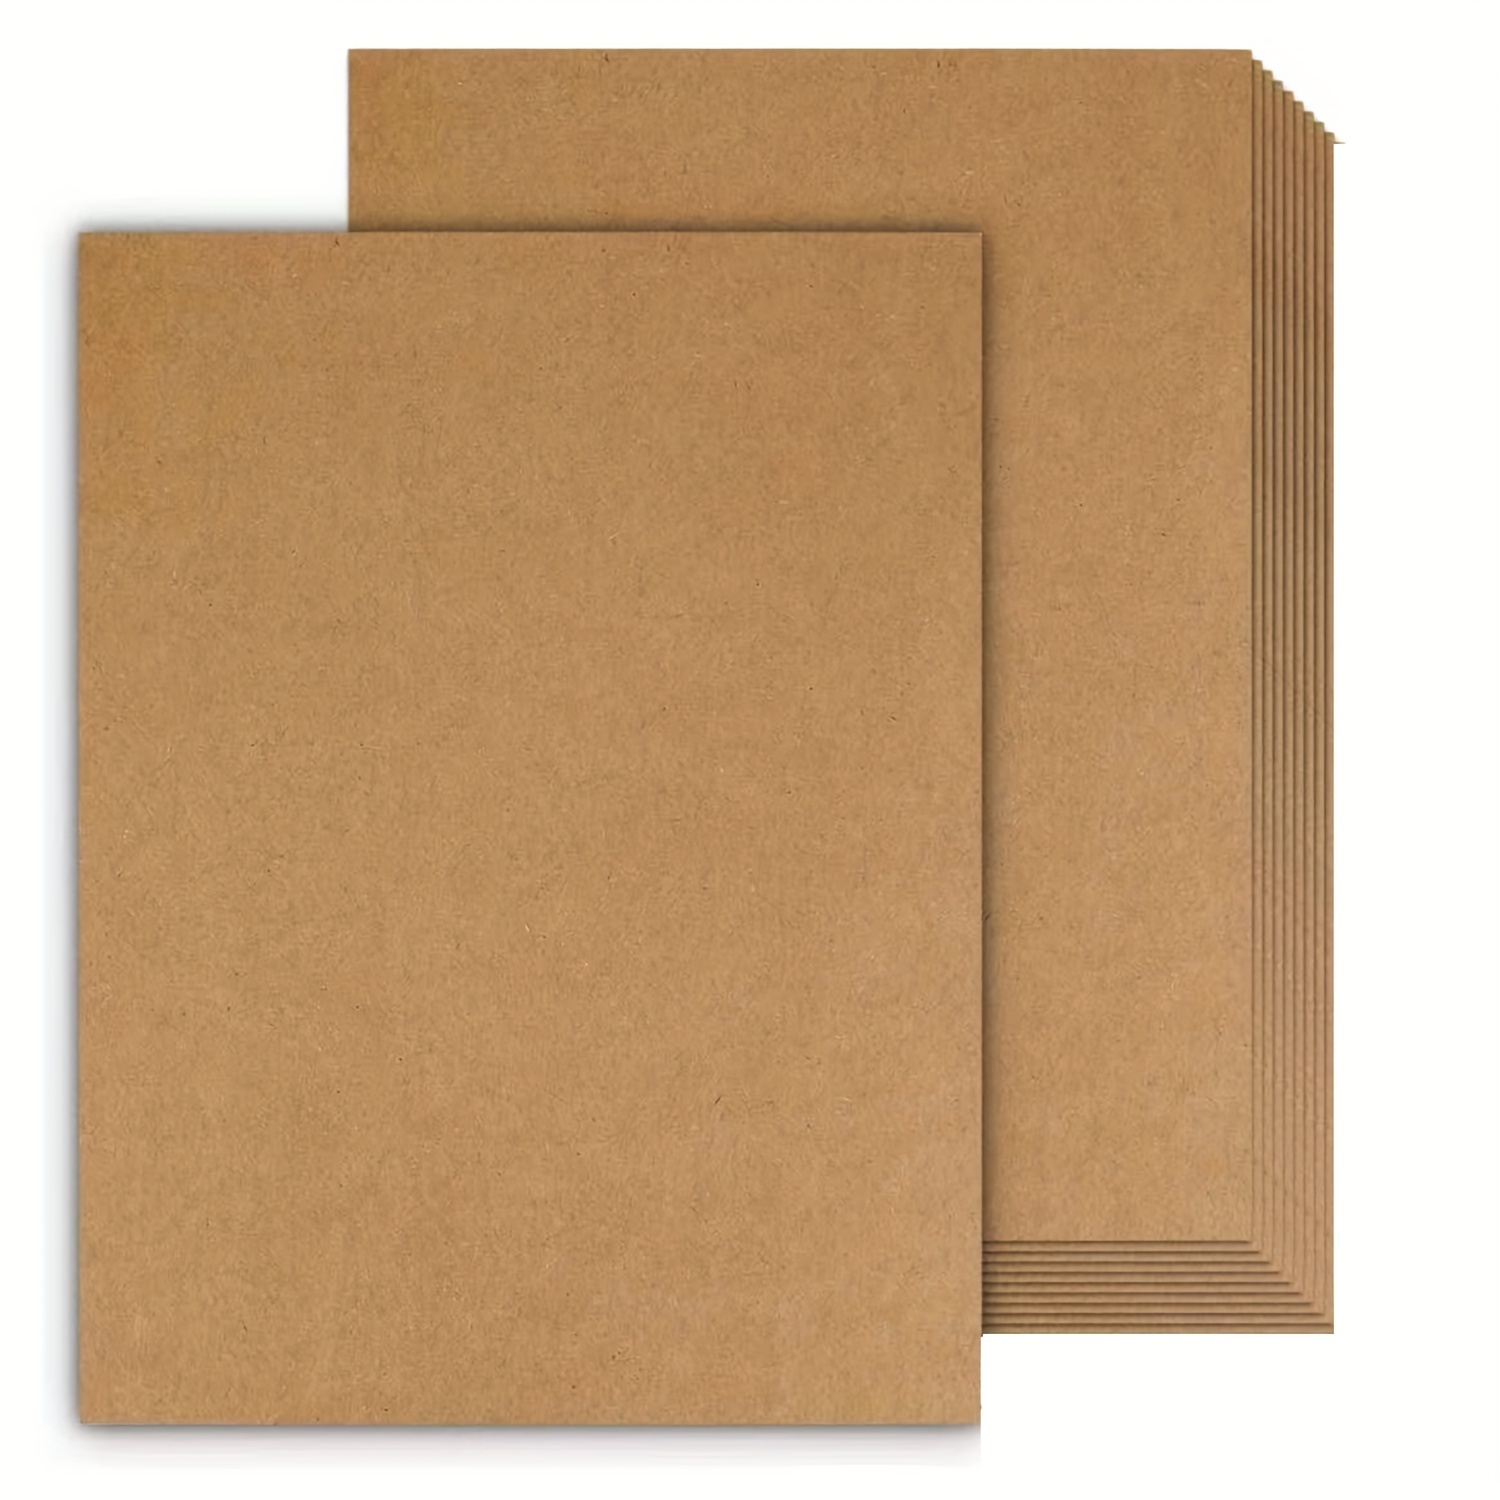 Brown Smooth Scrapbooking Cardstock 8.5 x 11 Size for sale